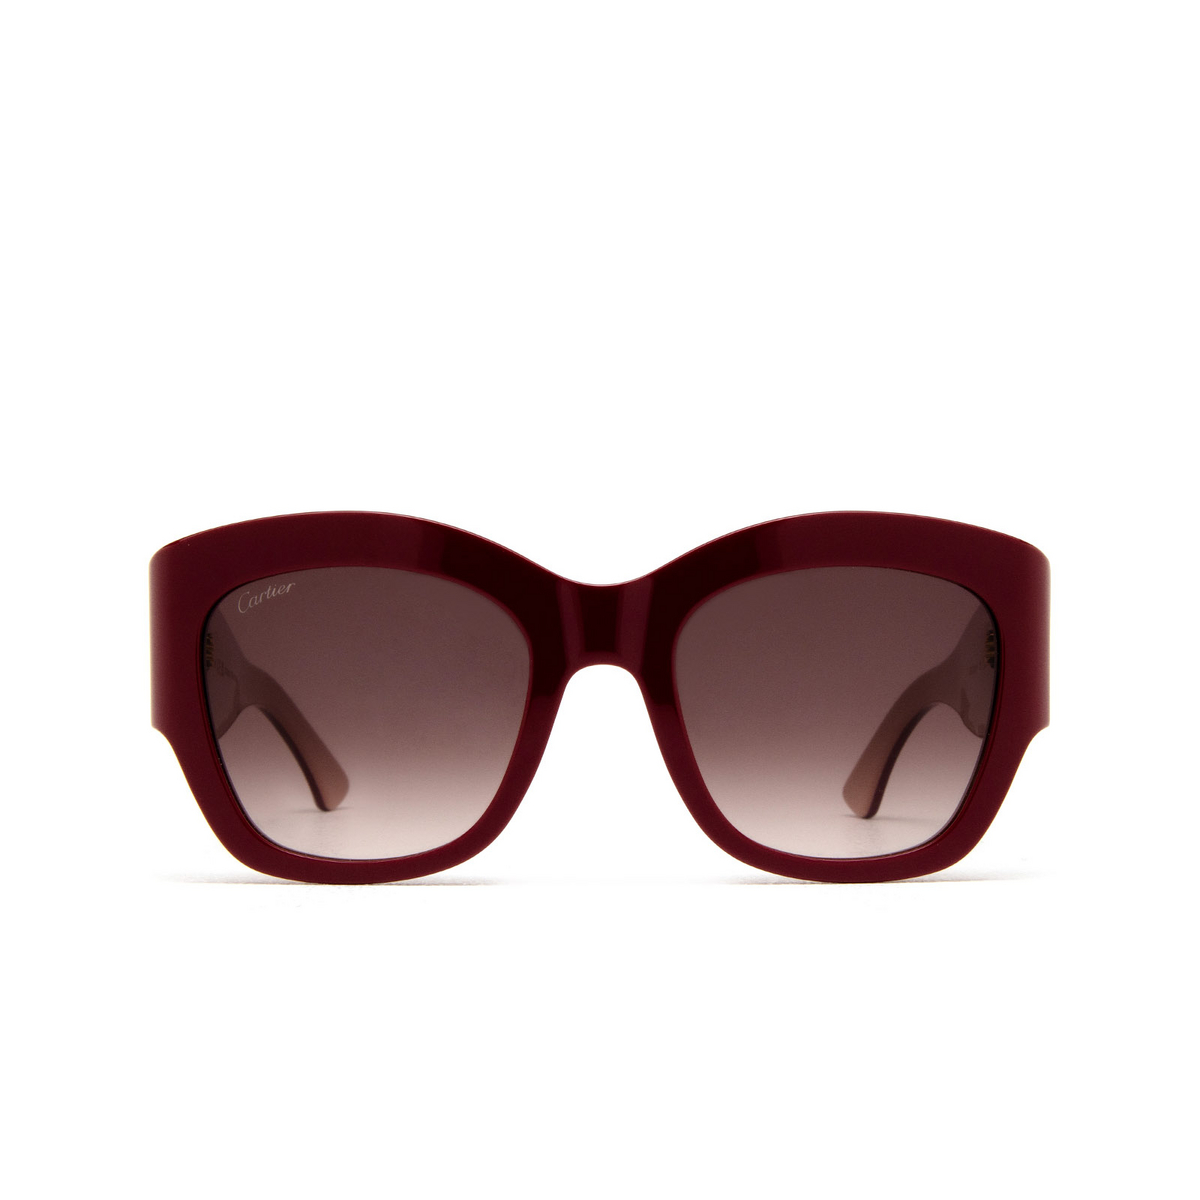 Cartier CT0304S Sunglasses 006 Burgundy - front view